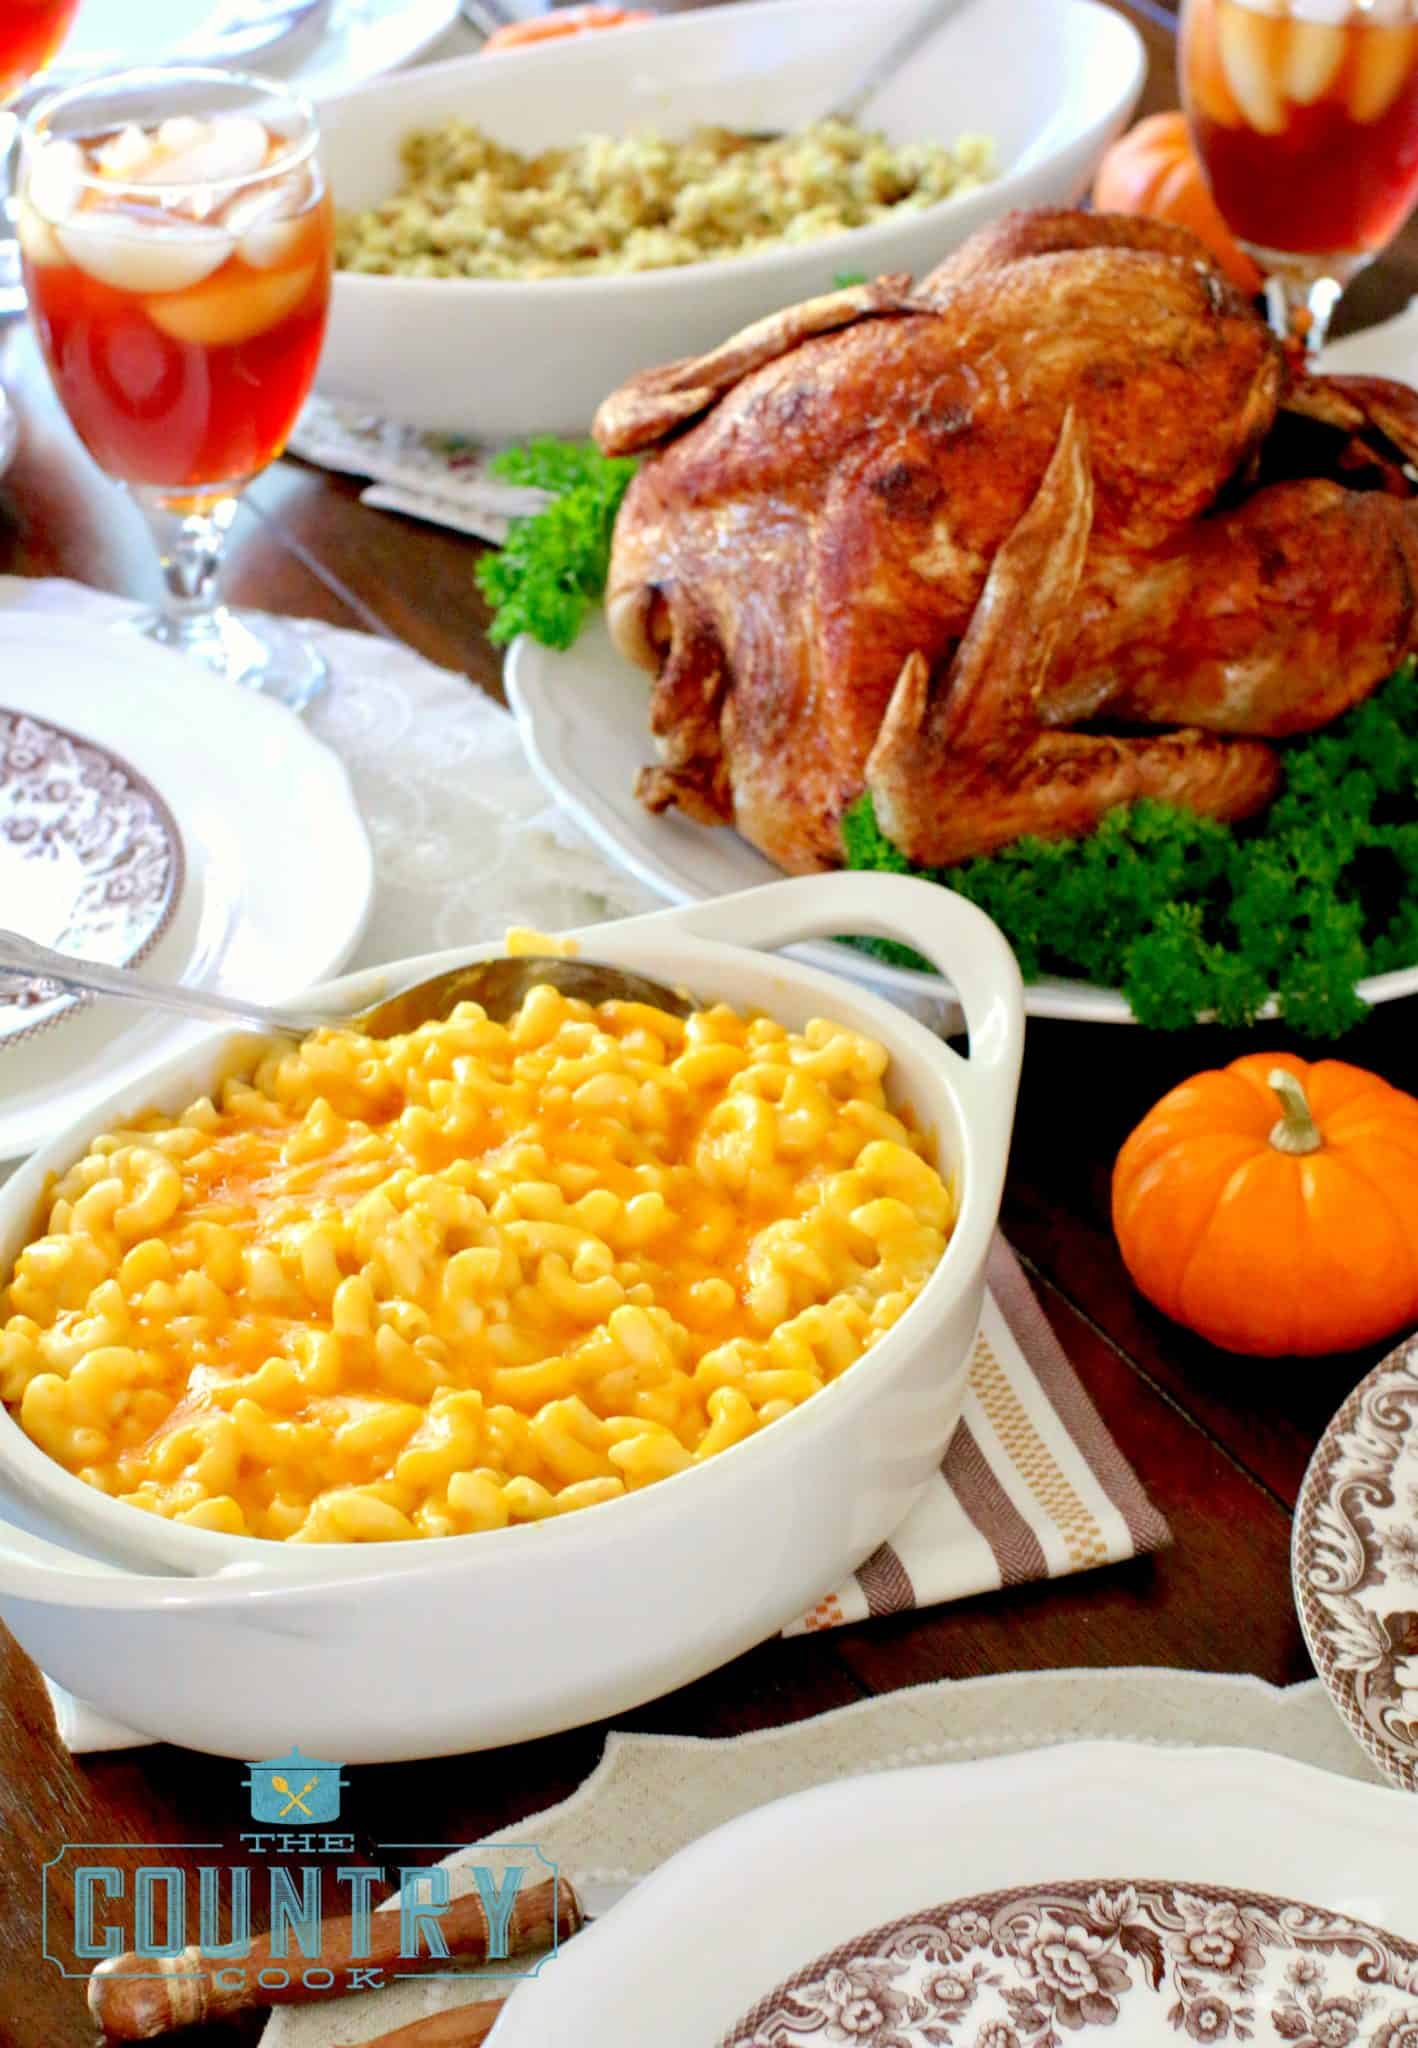 Thanksgiving Dinner shown displayed on a table with macaroni and cheese and fried turkey.